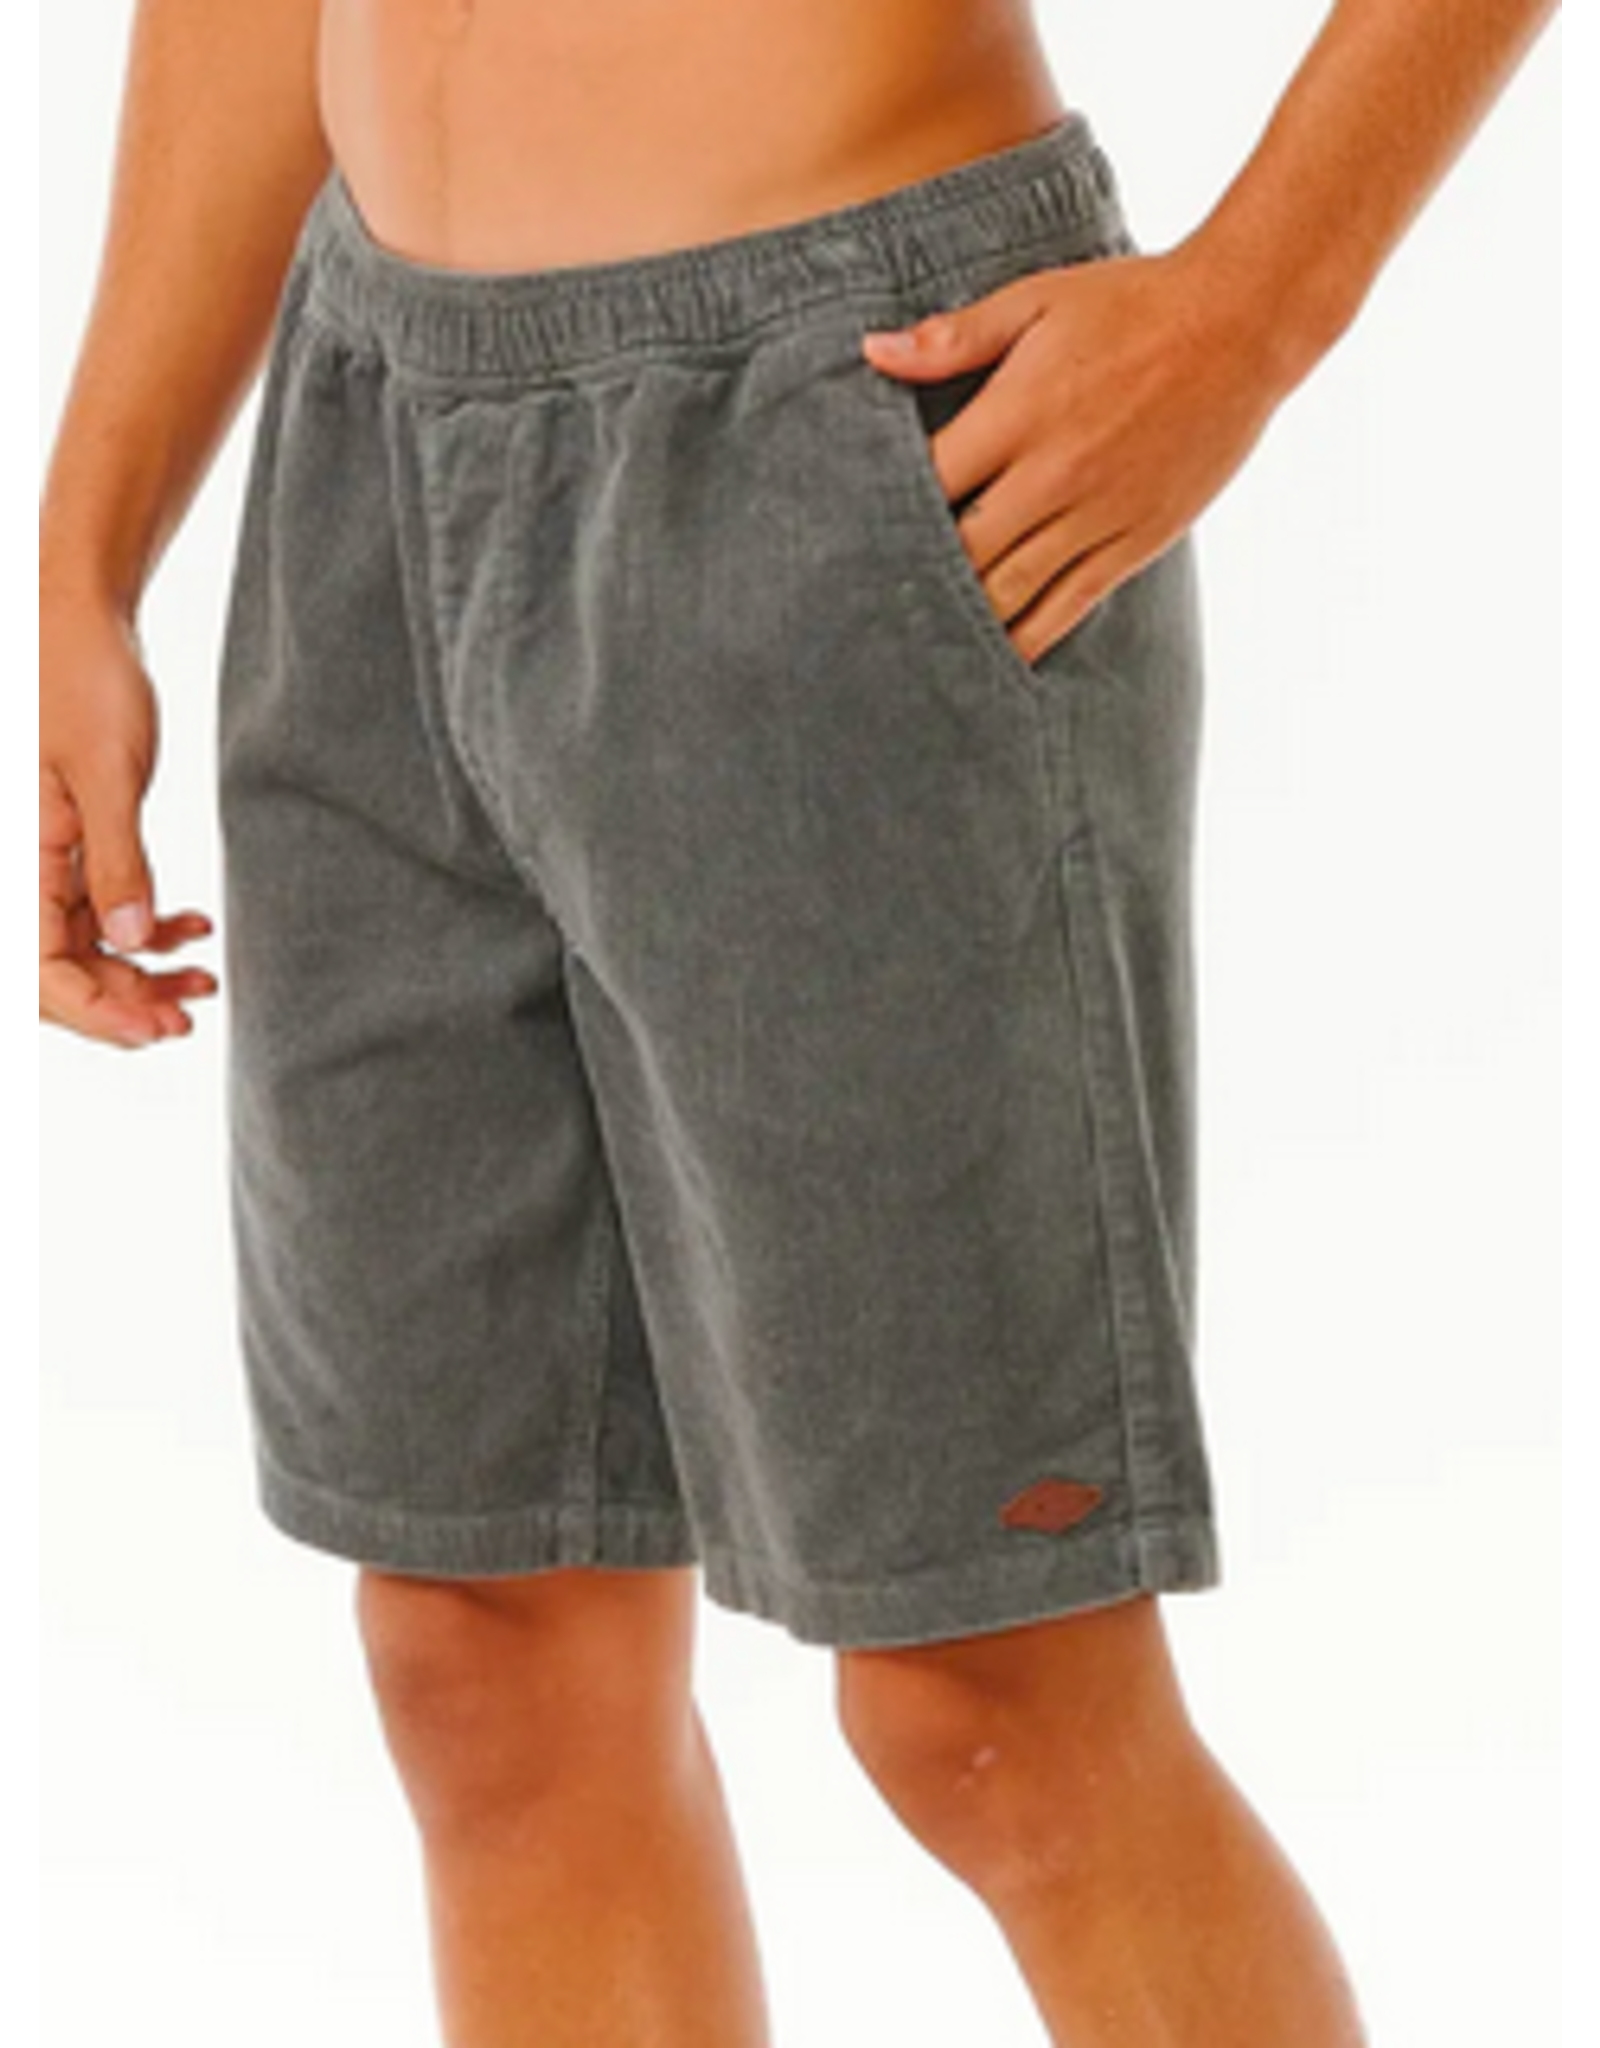 Rip Curl Rip Curl Classic Surf Velours Short Volley Black